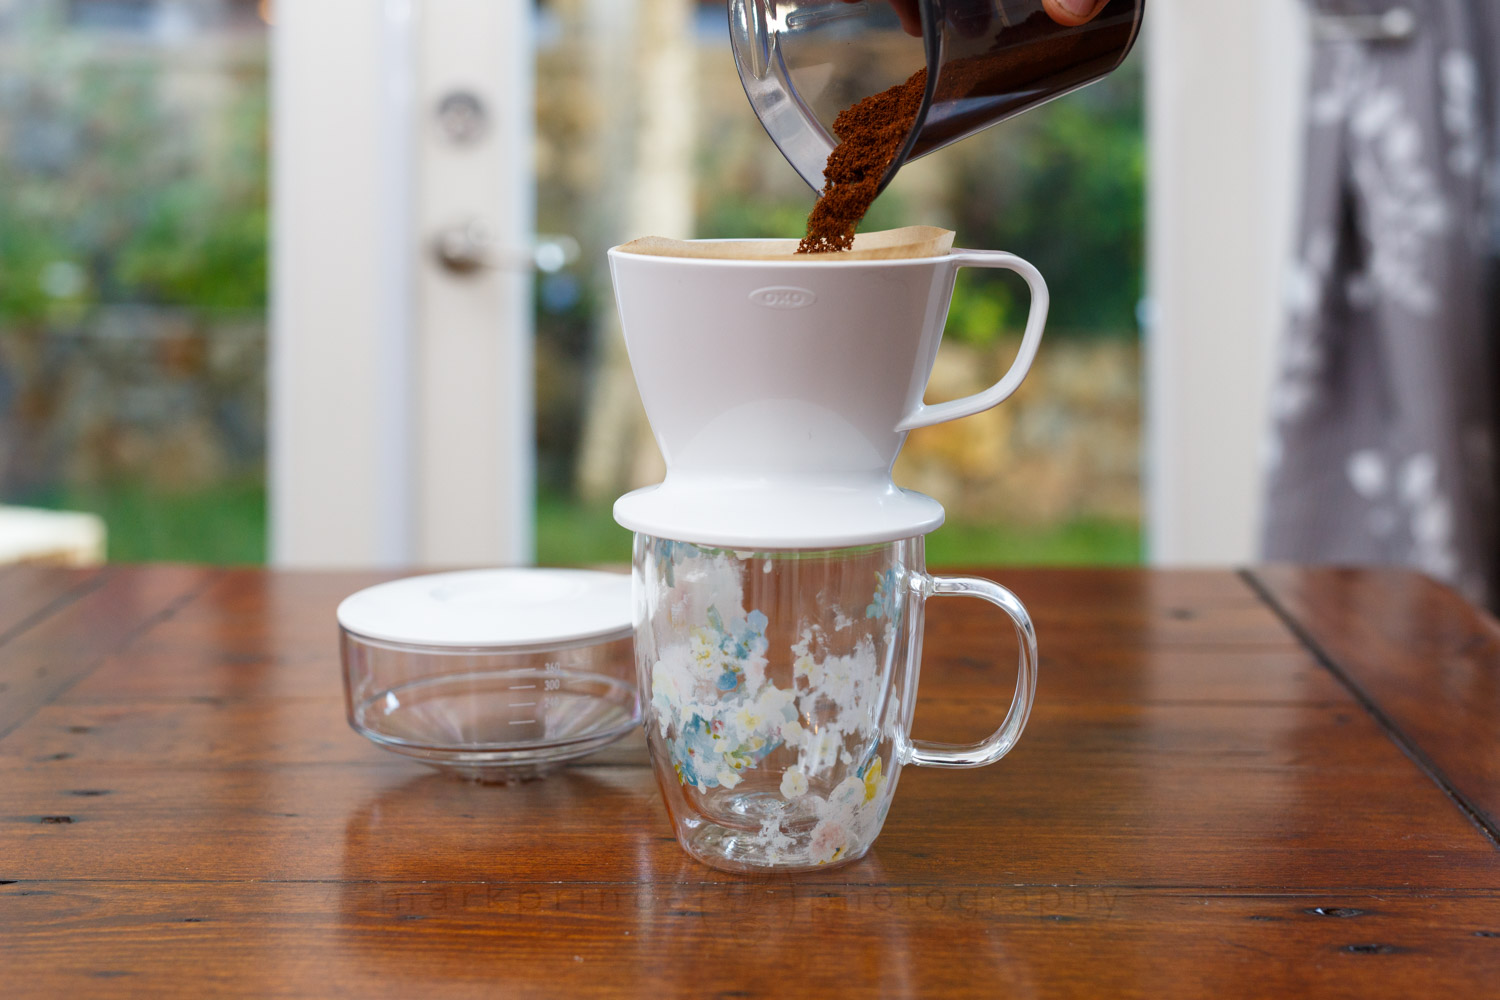 I Can't Brew Better Pour Over than a $15 OXO Plastic Contraption